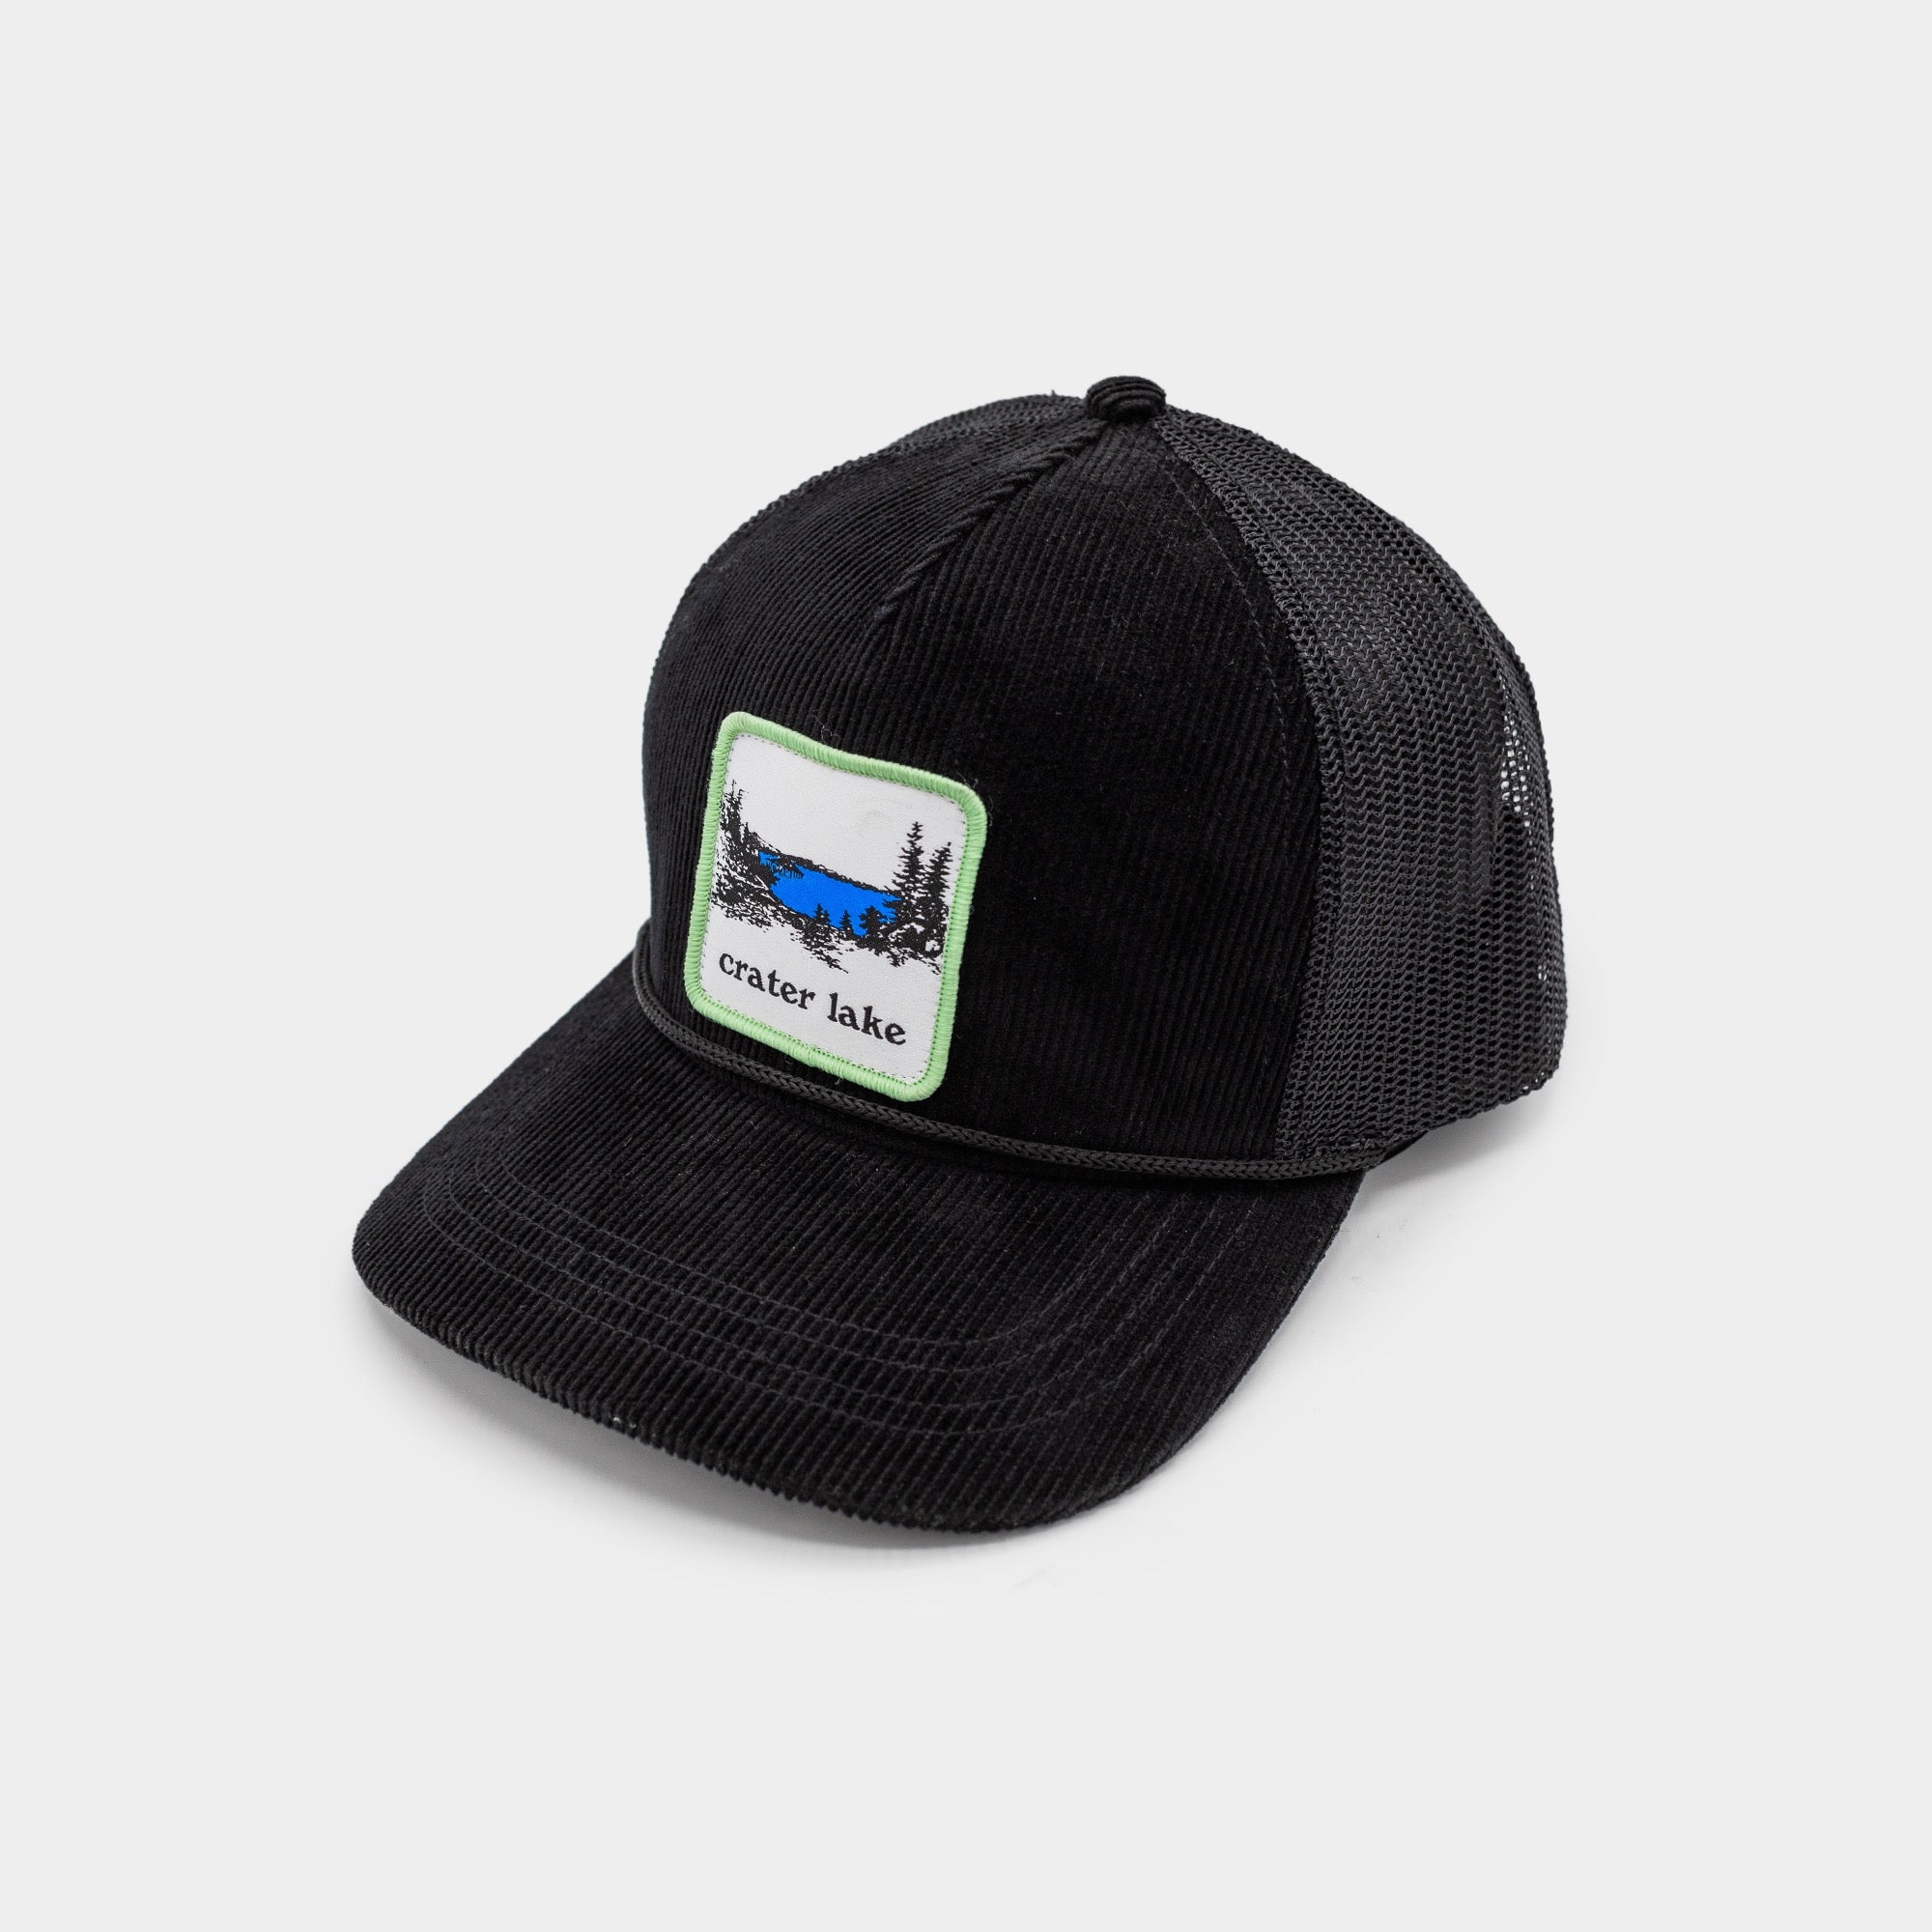 Patch Cap - Crater Lake